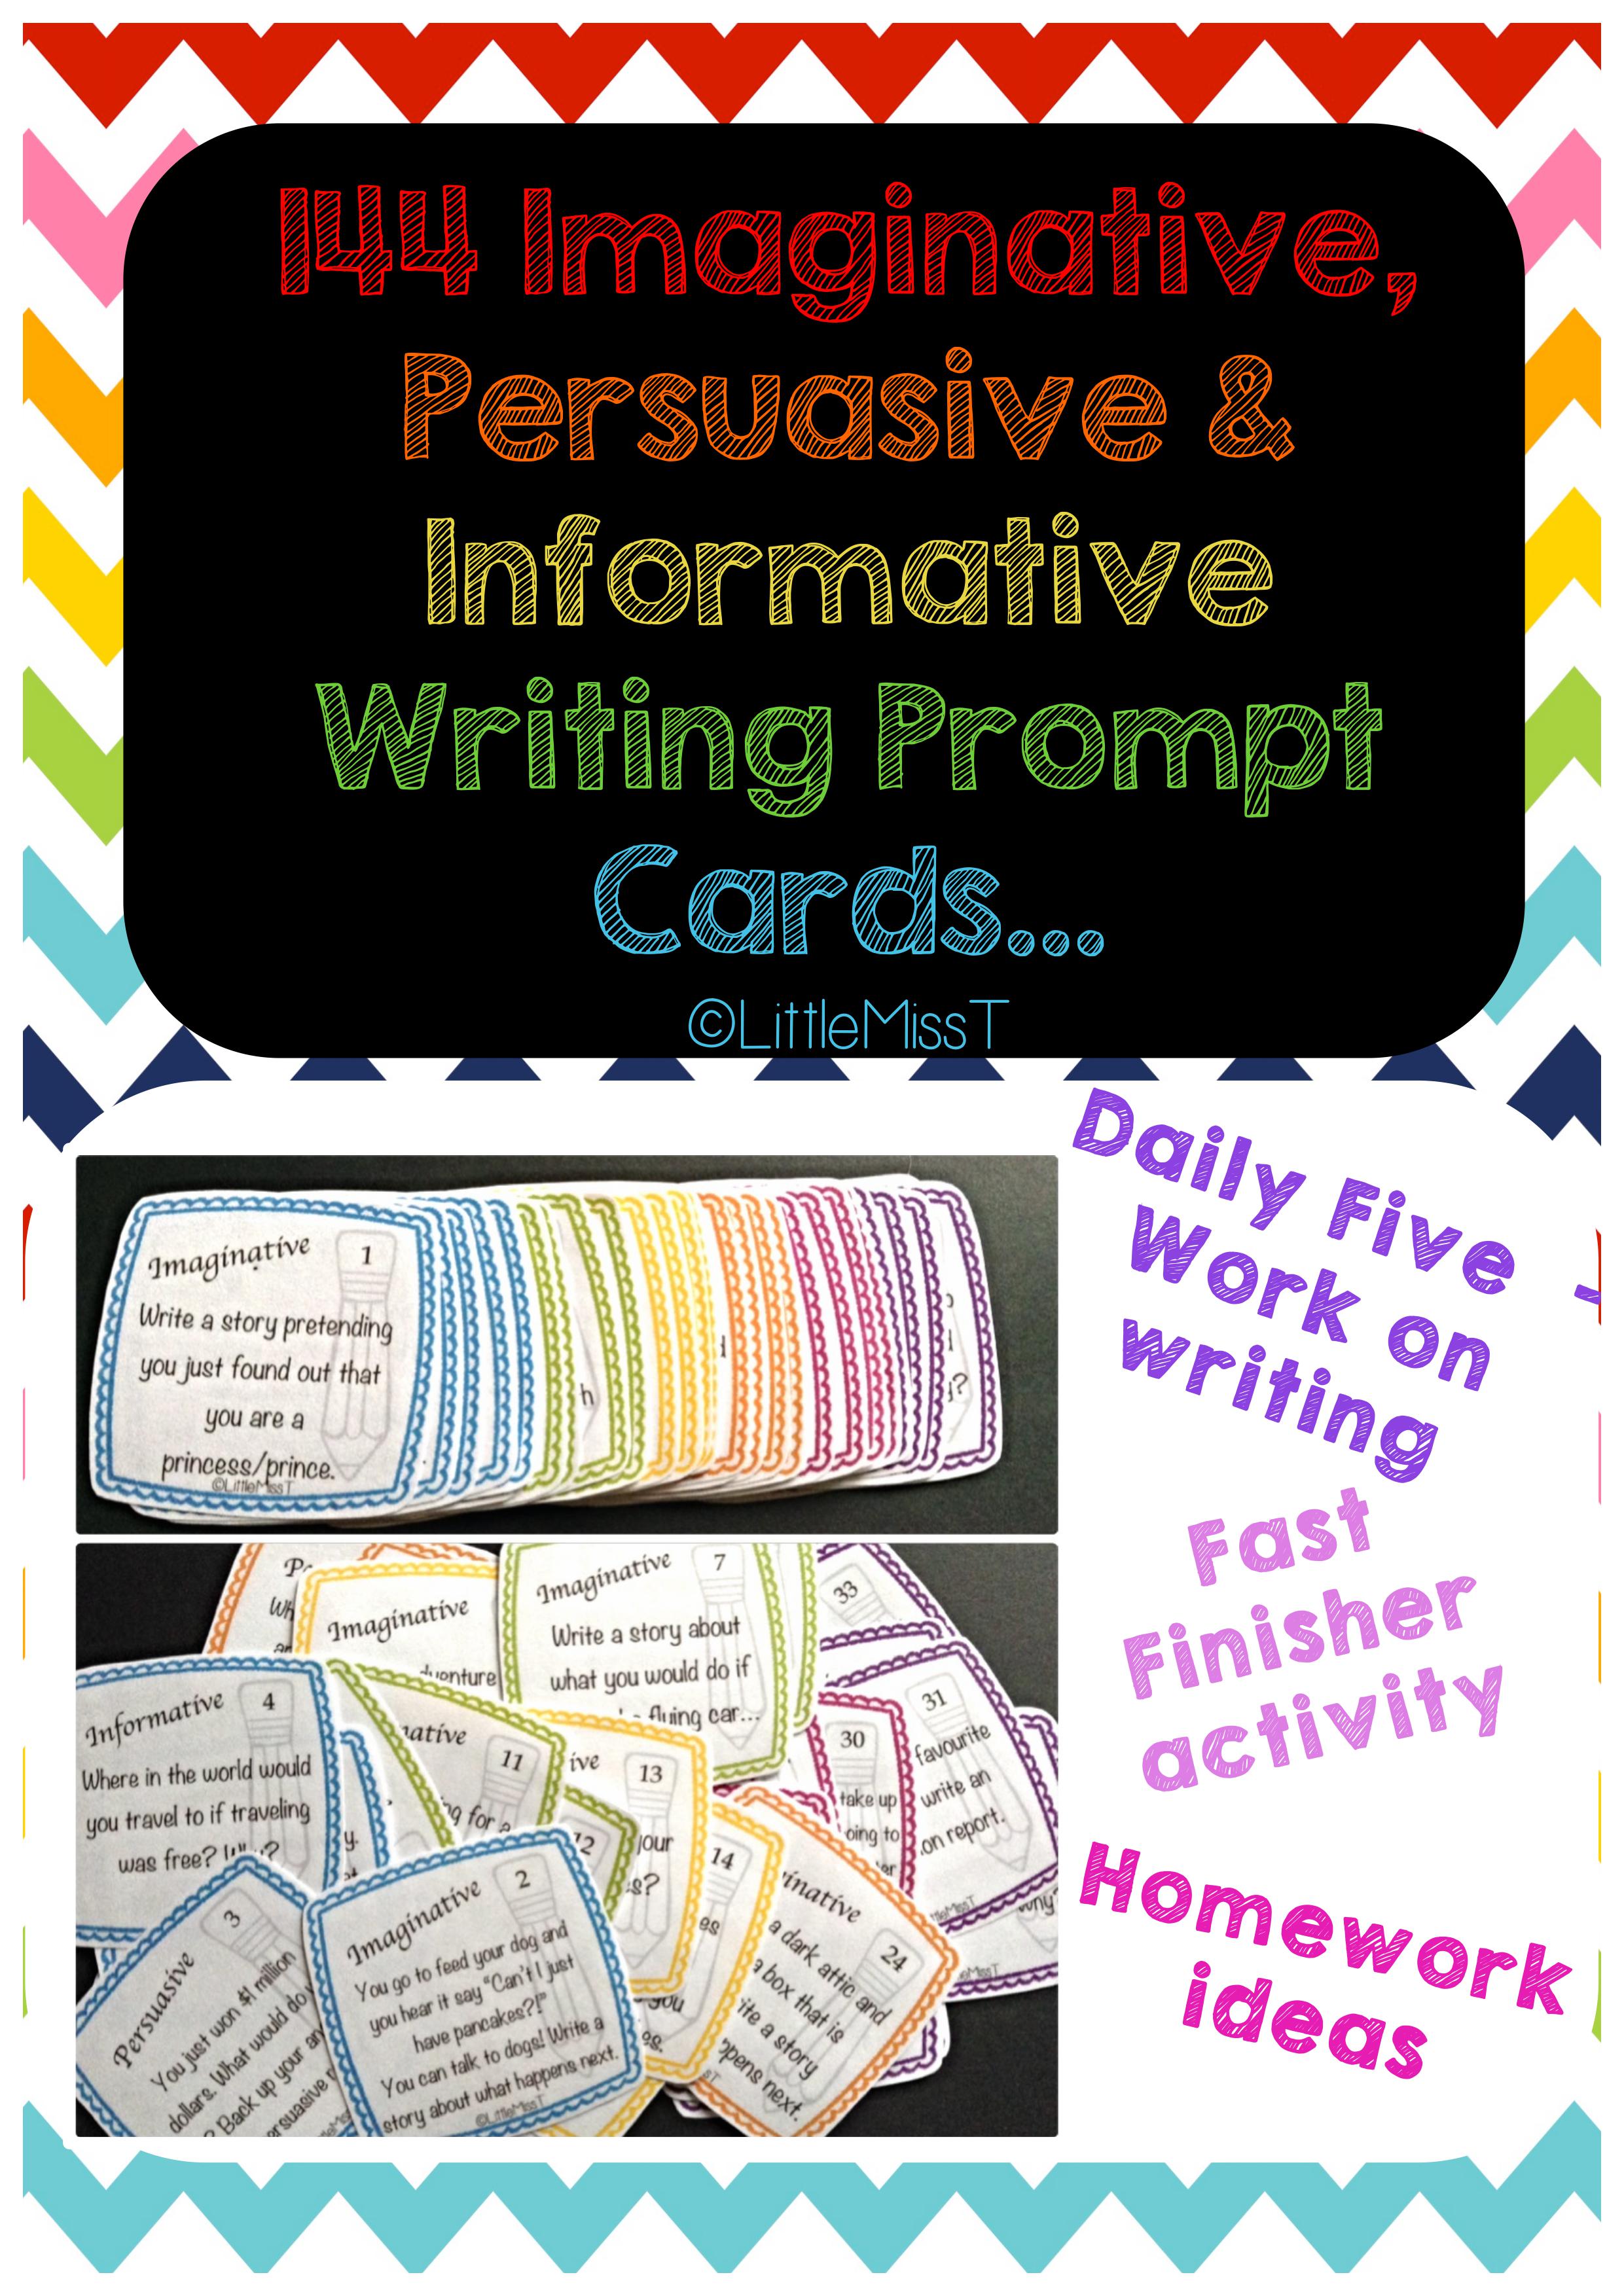 144 Writing prompt cards (Informative, Persuasive and Imaginative)- Daily 5 - Fast finisher activity